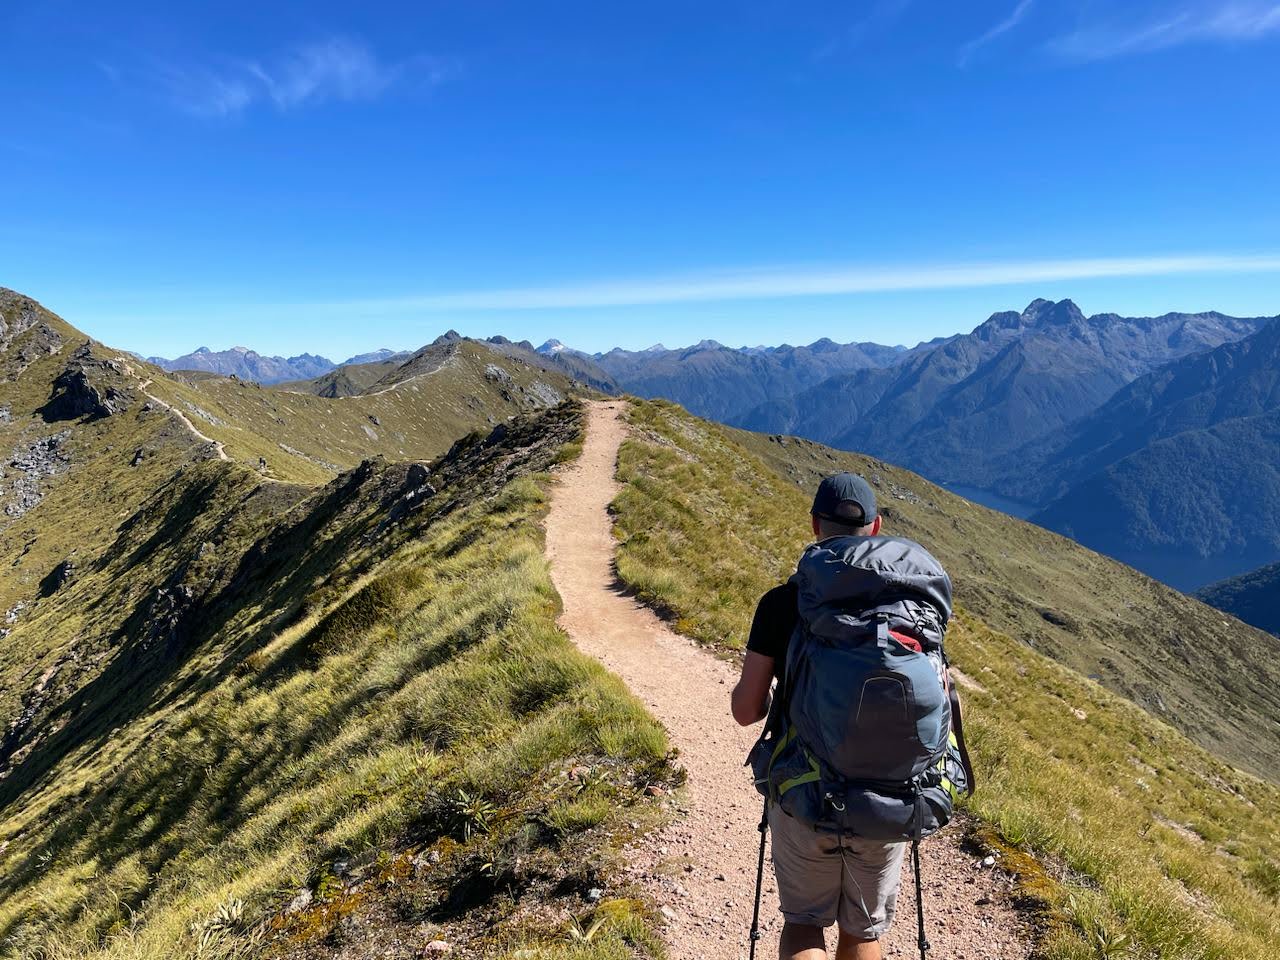 Man walking with a backpack on a narrow path along a ridgeline